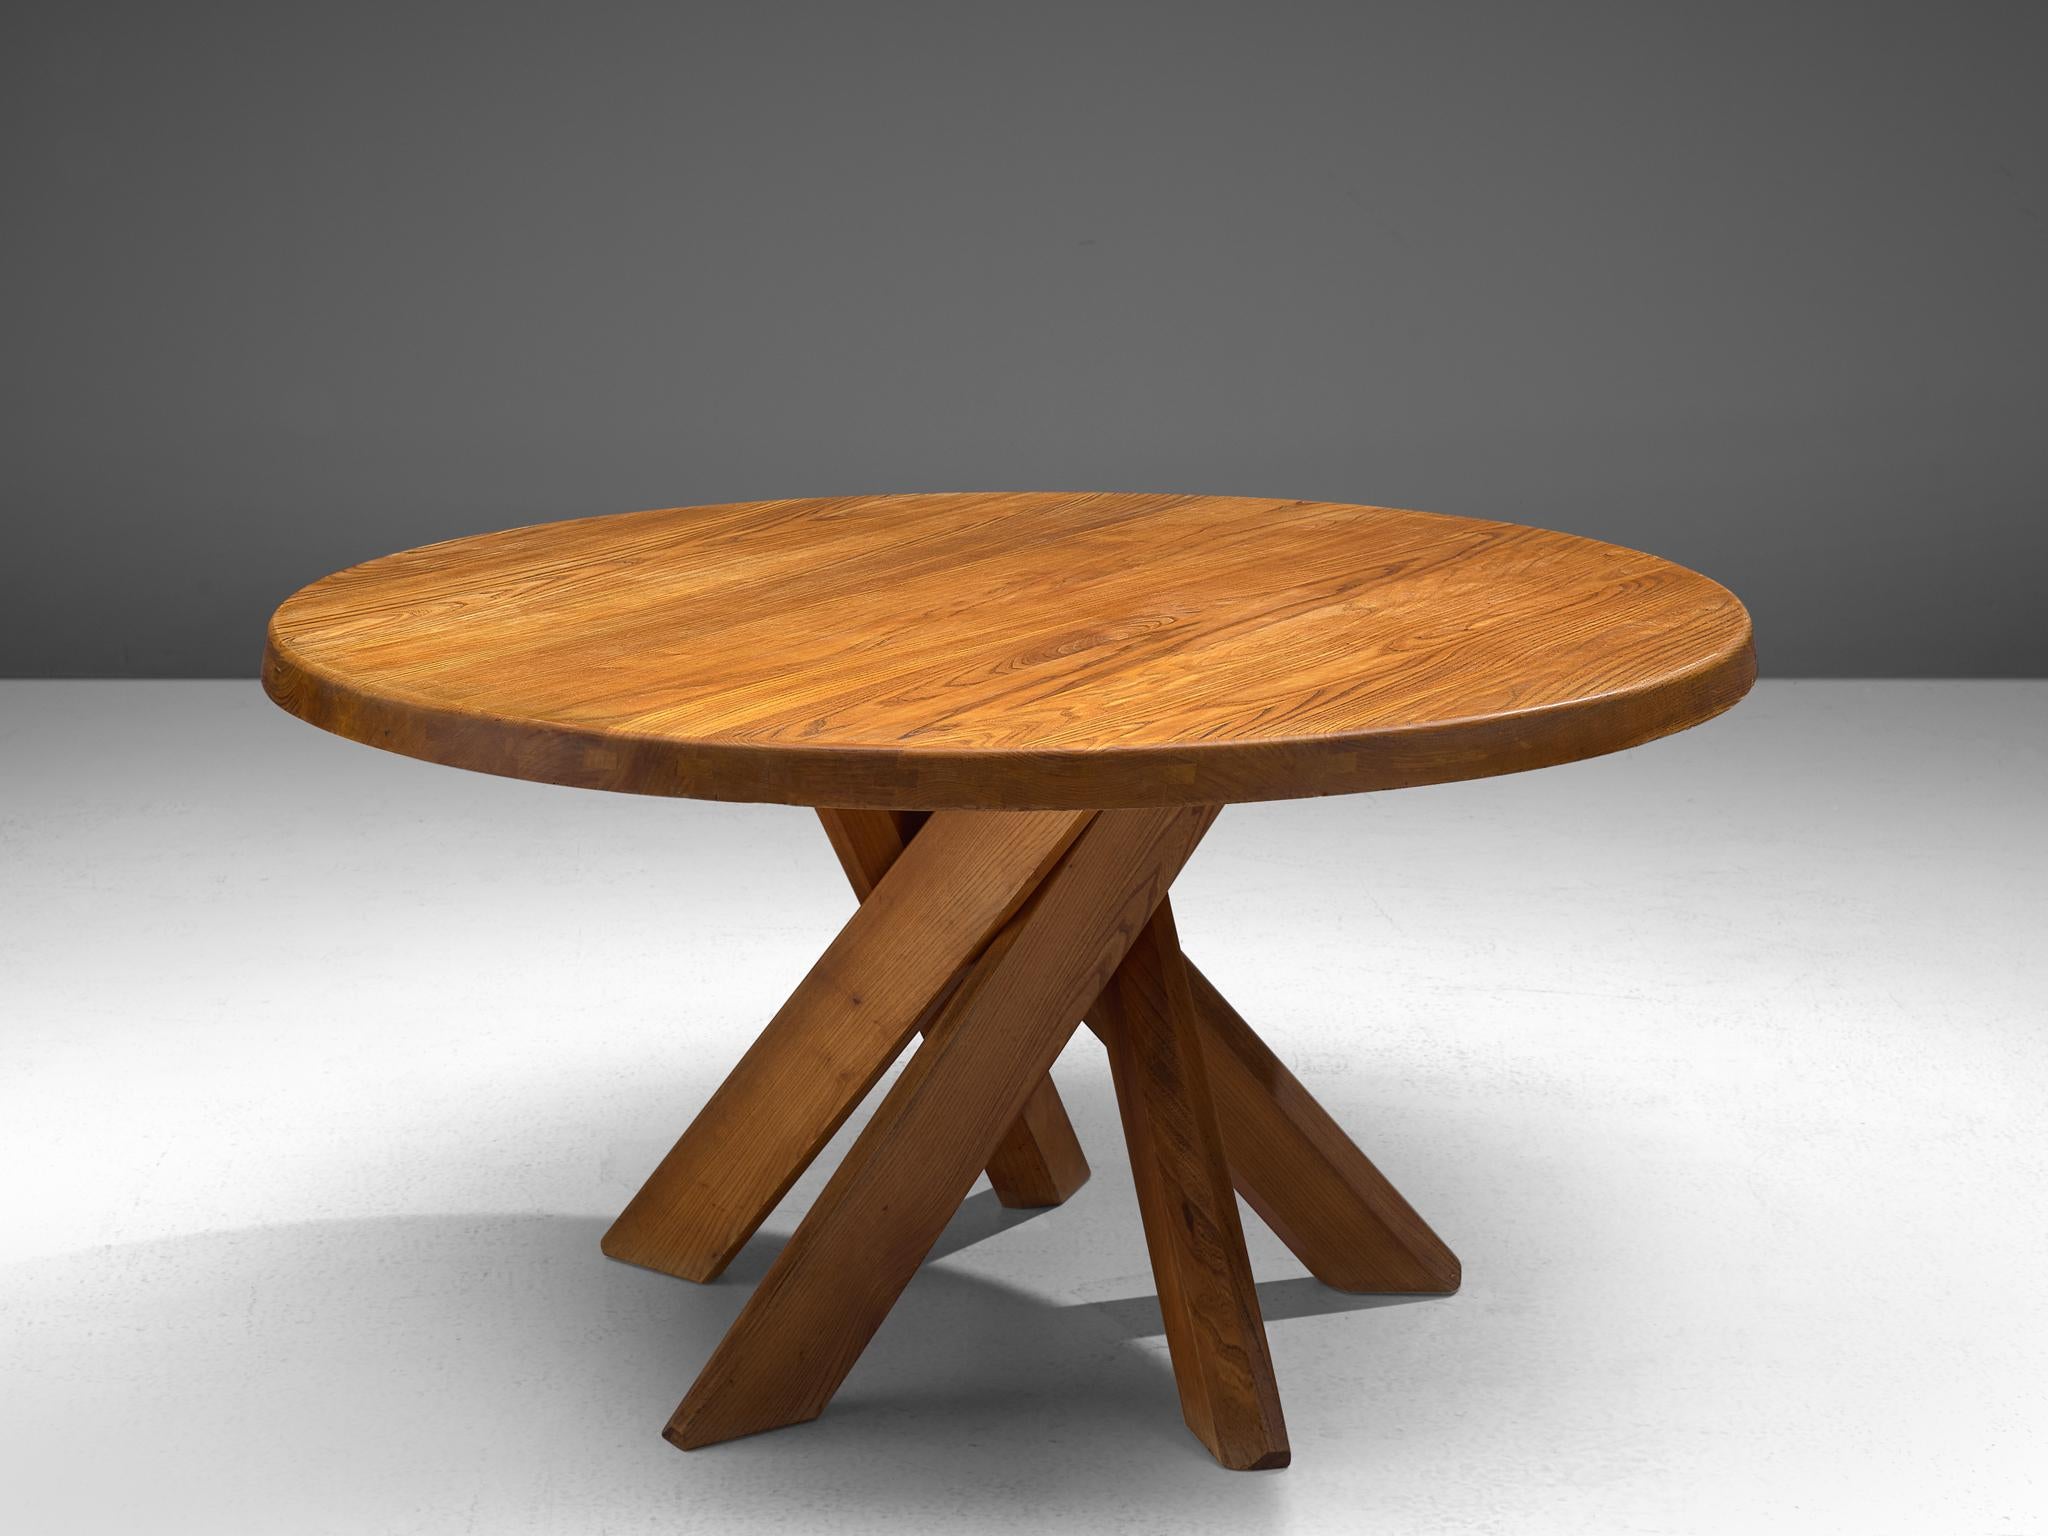 Pierre Chapo, dining table T21 'Sfax', elm, France, 1960s.

This round dining table with five legs is designed by Pierre Chapo. The shape of the base creates a very open look and makes this an object to make a space more interesting. The perfectly